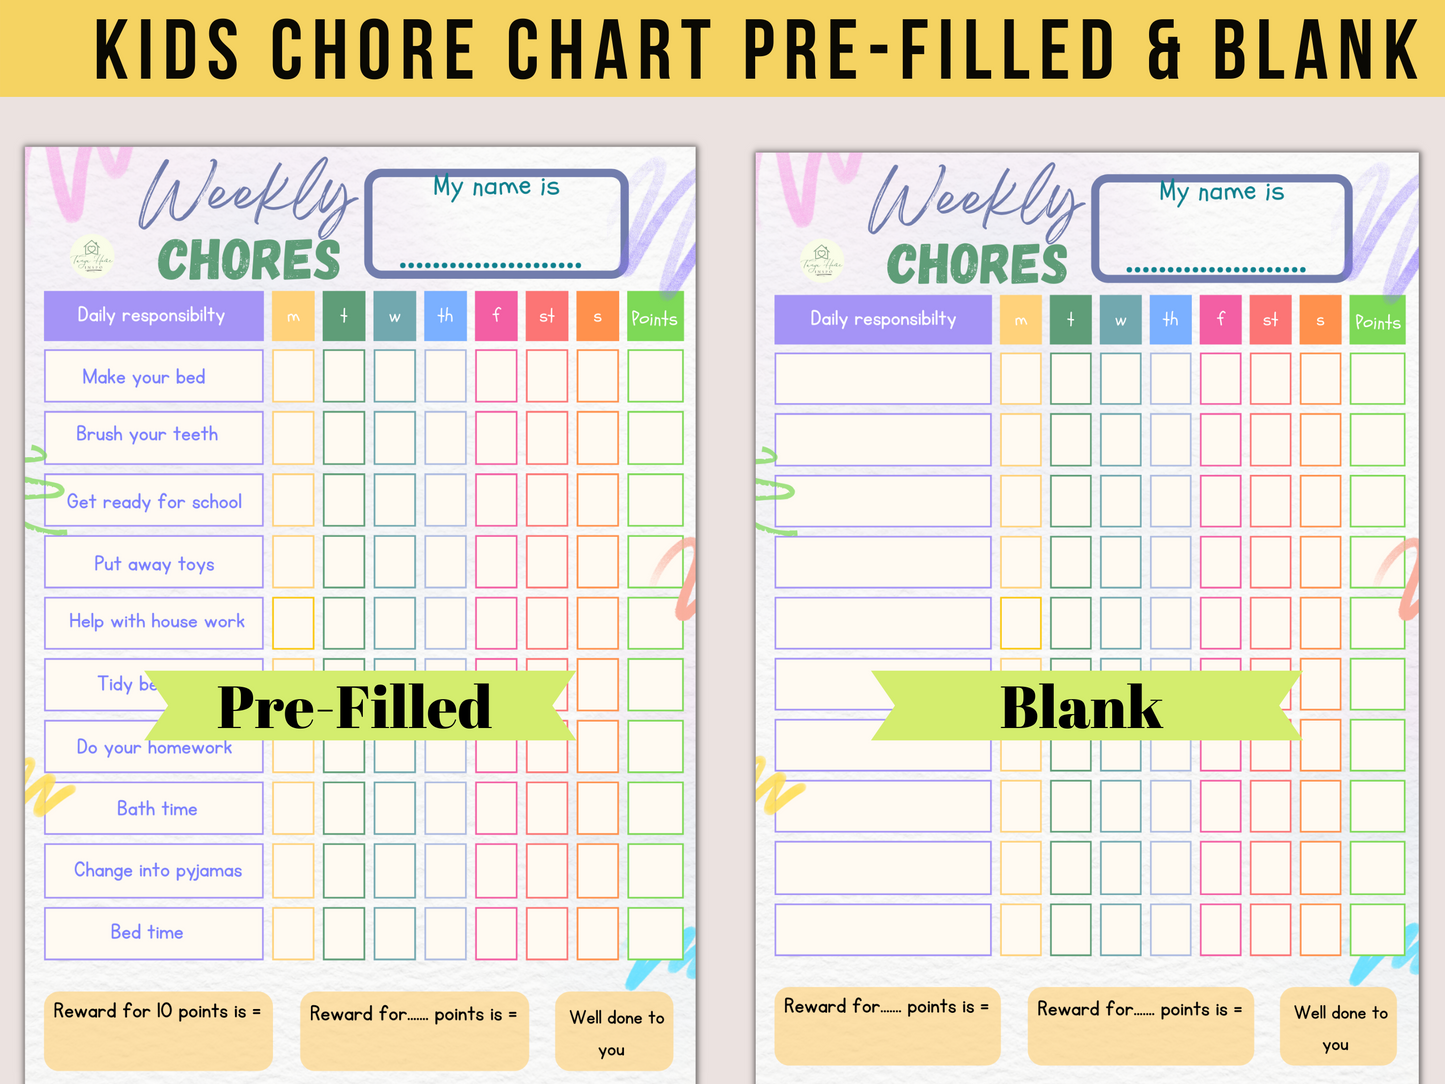 Family Cleaning Schedule Bundle - Digital PDF